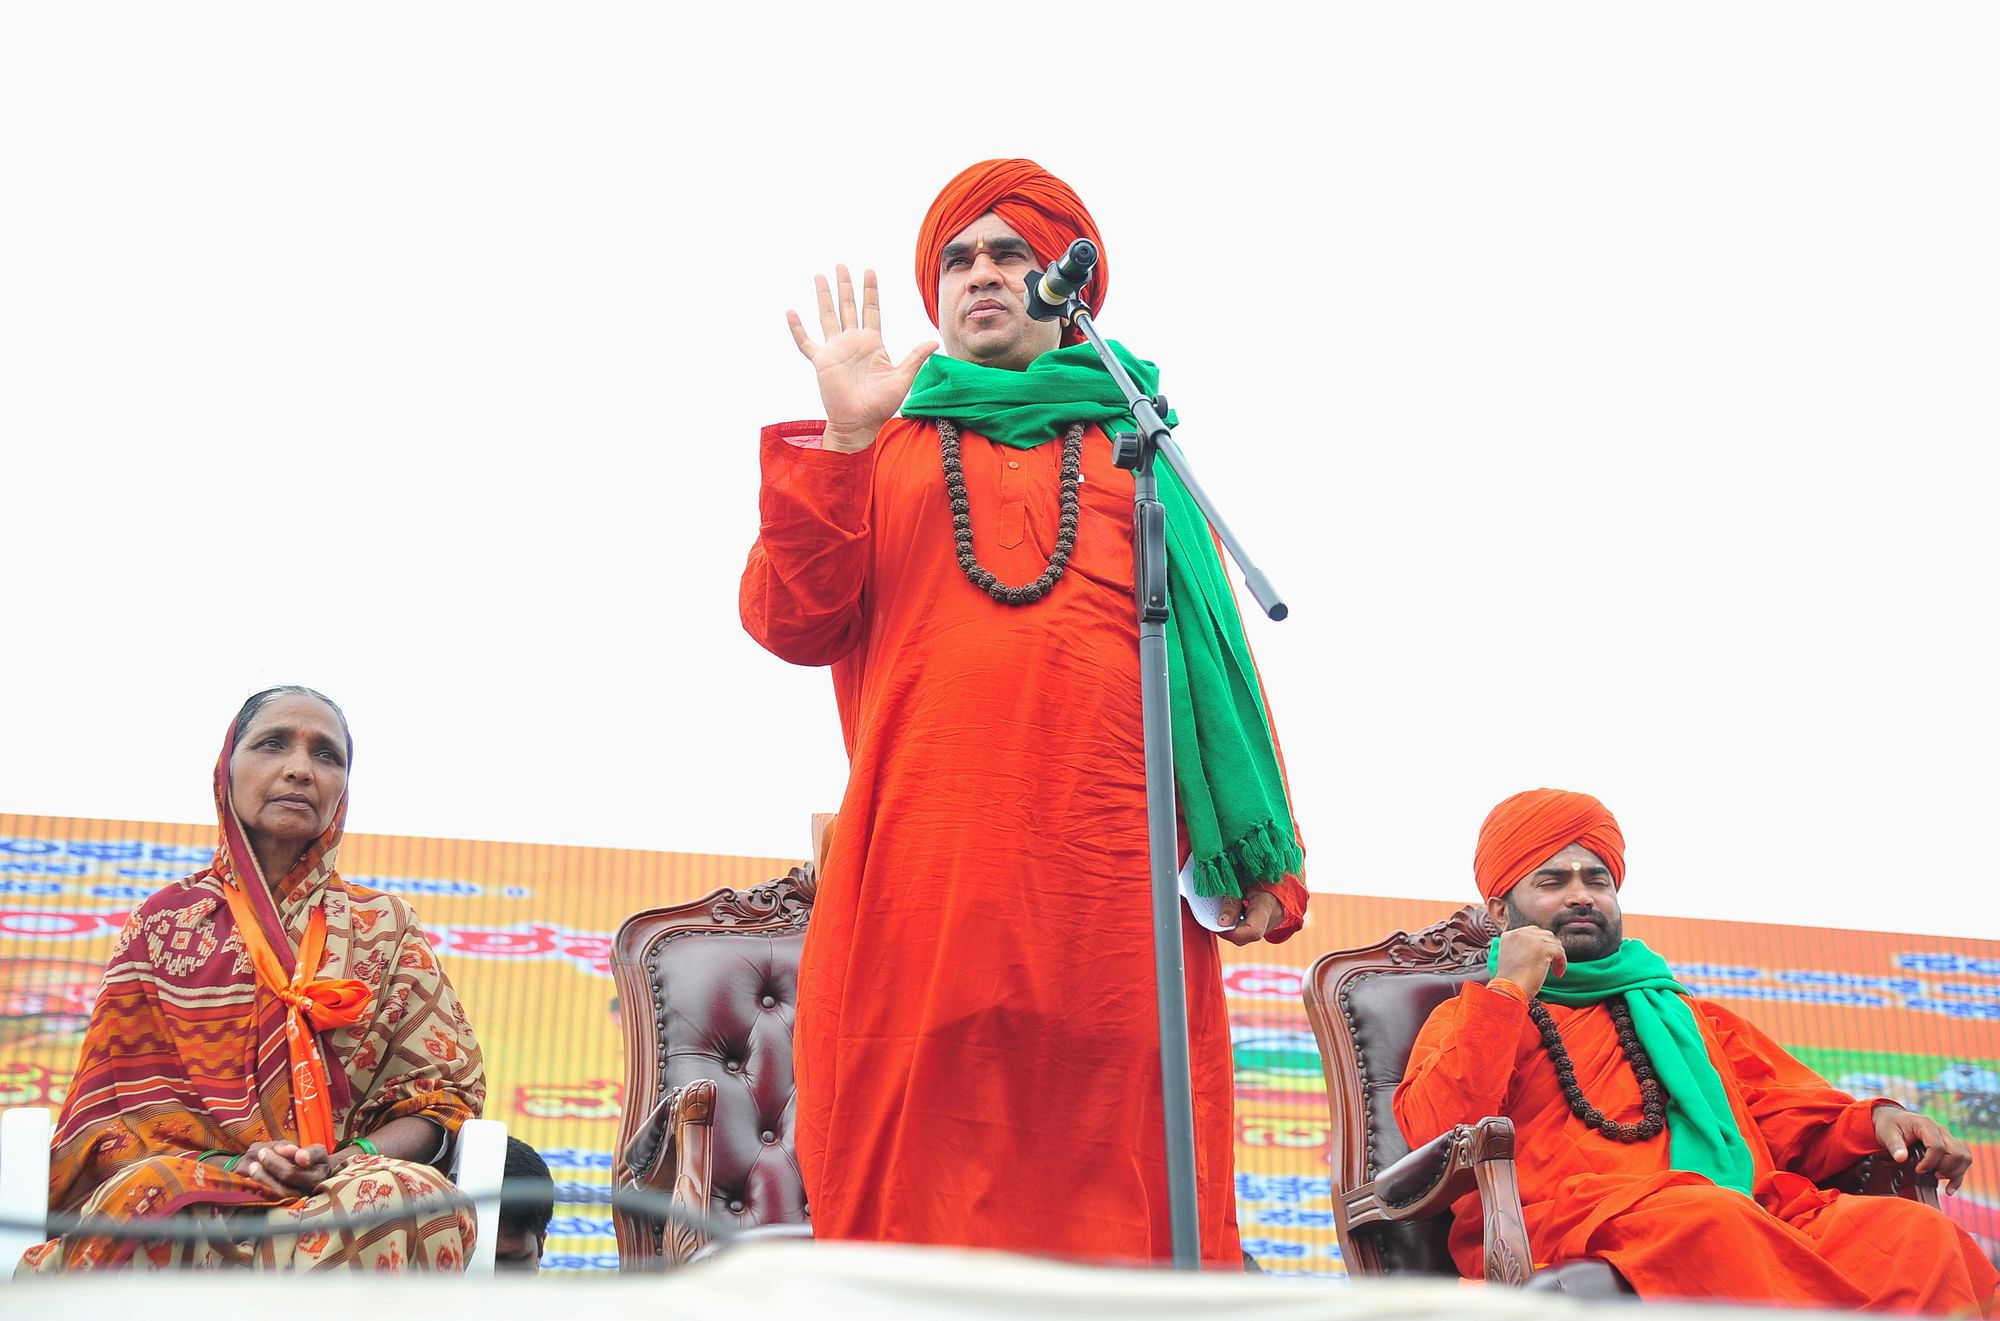 Sri Jaya Mruthyunjaya Swami speaks as Sri Vachanananda Swami (R) looks on during the Panchamasali convention to demand for the inclusion of Lingayat community in the 2A reservation category, in Bengaluru on Sunday.